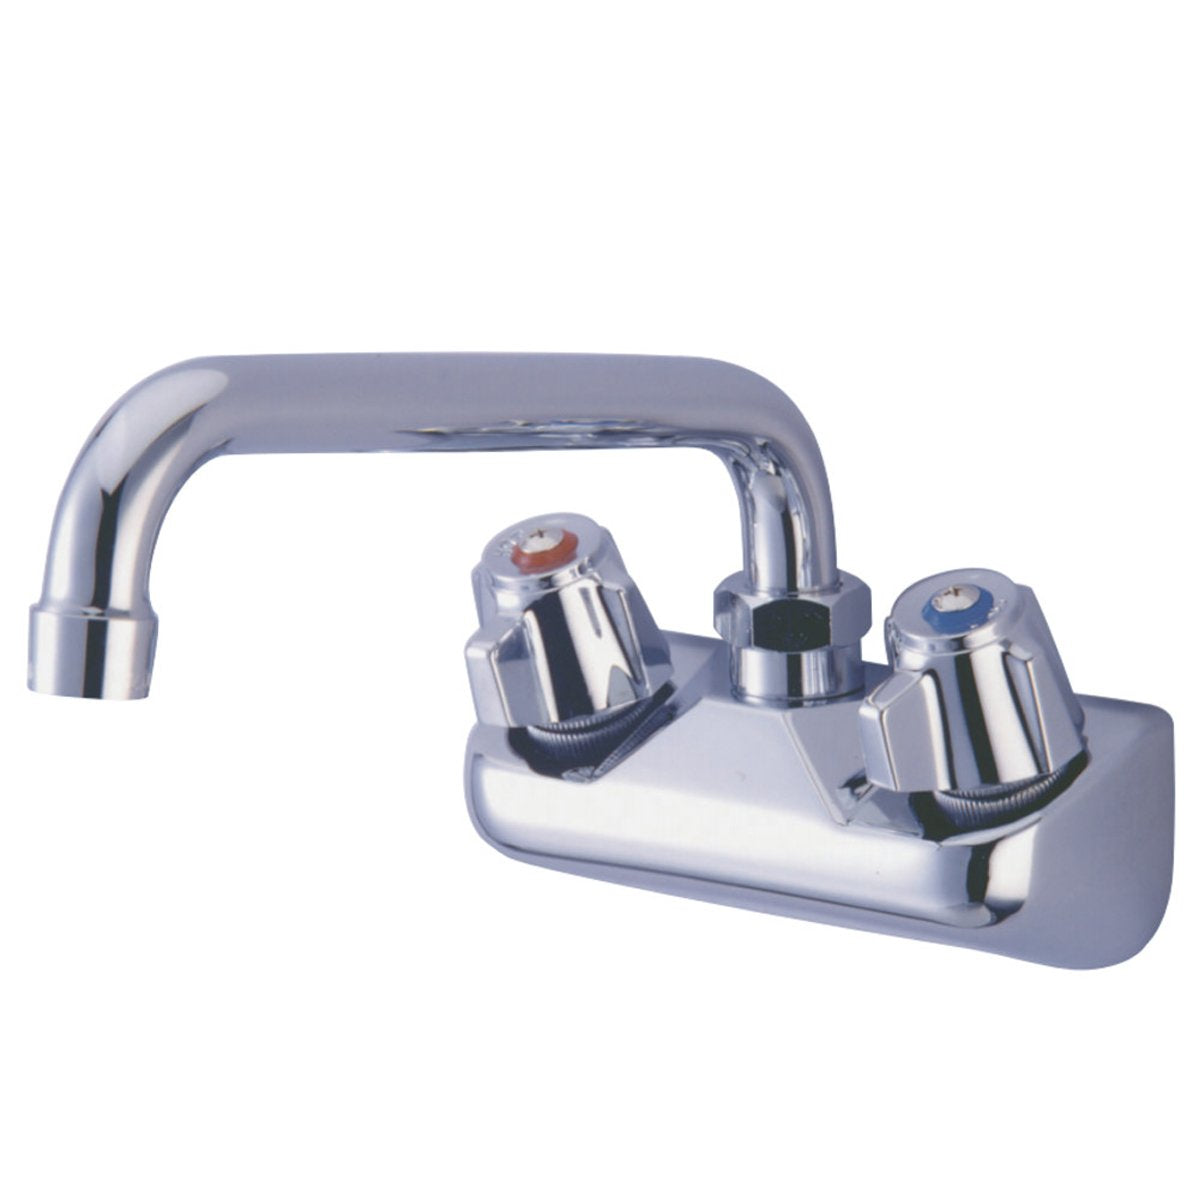 Kingston Brass KF421 Proseal 4-Inch Centerset Wall Mount Kitchen Faucet in Polished Chrome